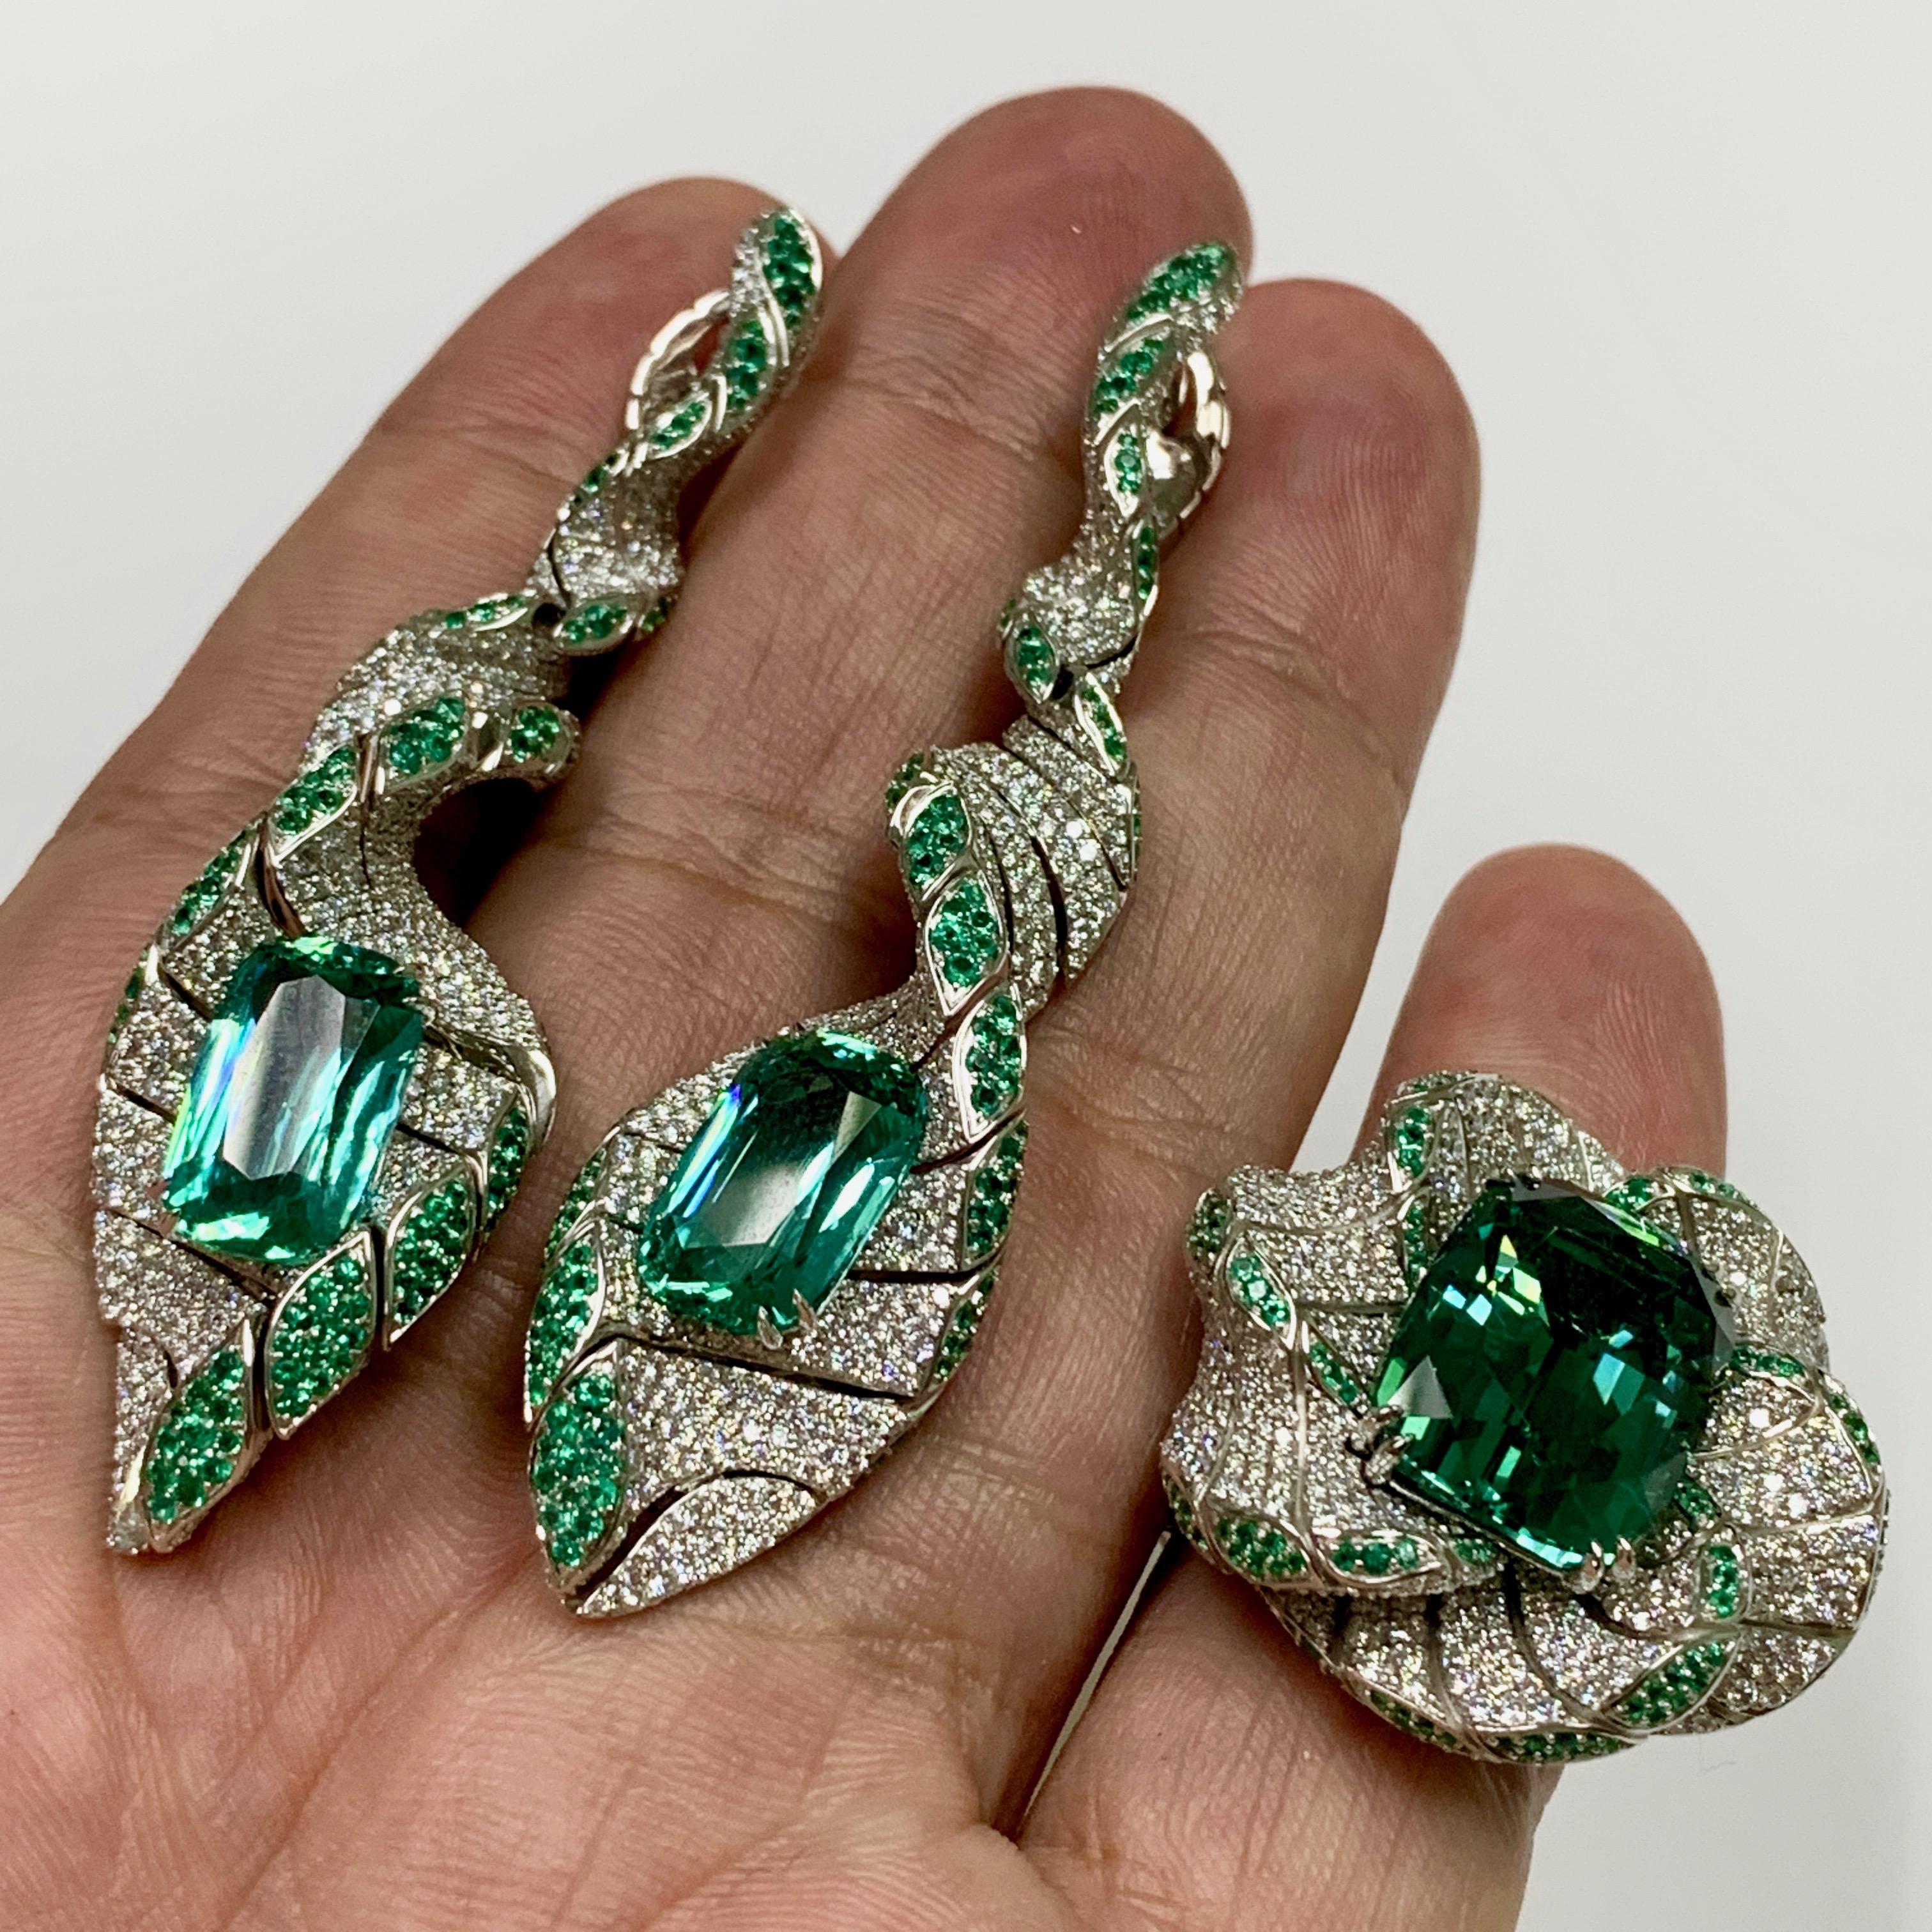 Tourmaline Diamonds Emeralds 18 Karat White Gold DNA Suite
In the shape of this Suite, you probably already guessed that when they were created, our designers were inspired by the structure of human DNA. What could be more perfect? But not only the